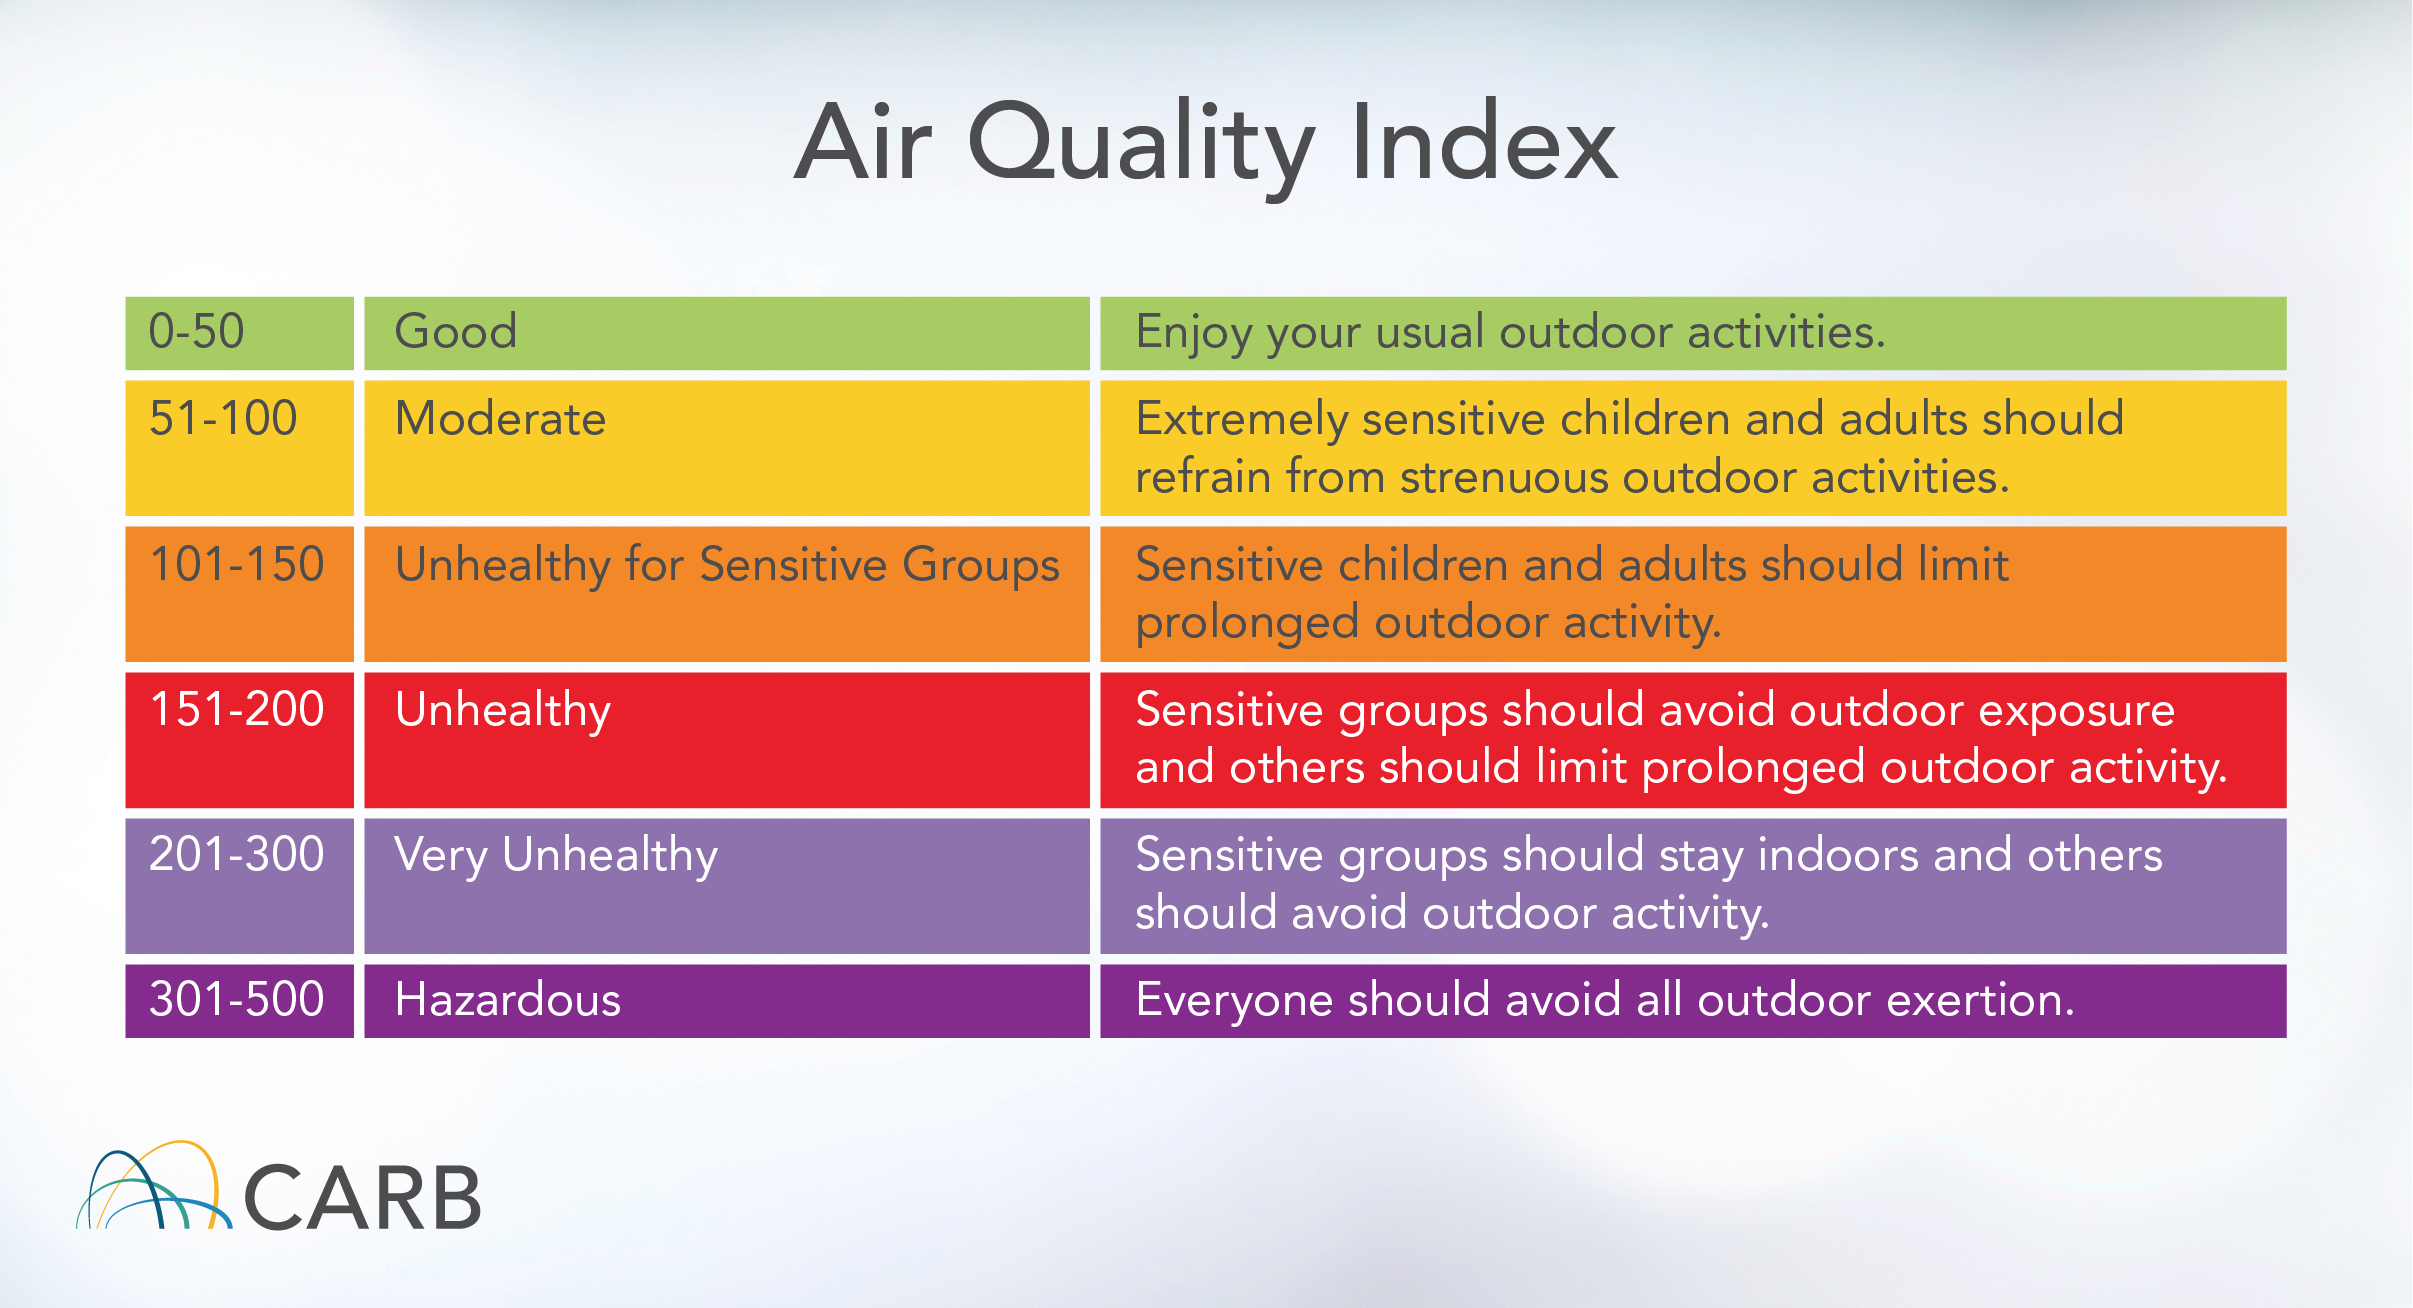 Air Quality Index 0-50, Good: Enjoy your usual outdoor activities. 51-100, Moderate: Extremely sensitive children and adults should refrain from strenuous outdoor activities. 101-150, Unhealthy for Sensitive Groups: Sensitive children and adults should limit prolonged outdoor activity. 151-200, Unhealthy: Sensitive groups should avoid outdoor exposure and others should limit prolonged outdoor activity. 201-300, Very Unhealthy: Sensitive groups should stay indoors and others should avoid outdoor activity. 301-500, Hazardous: Everyone should avoid all outdoor exertion.